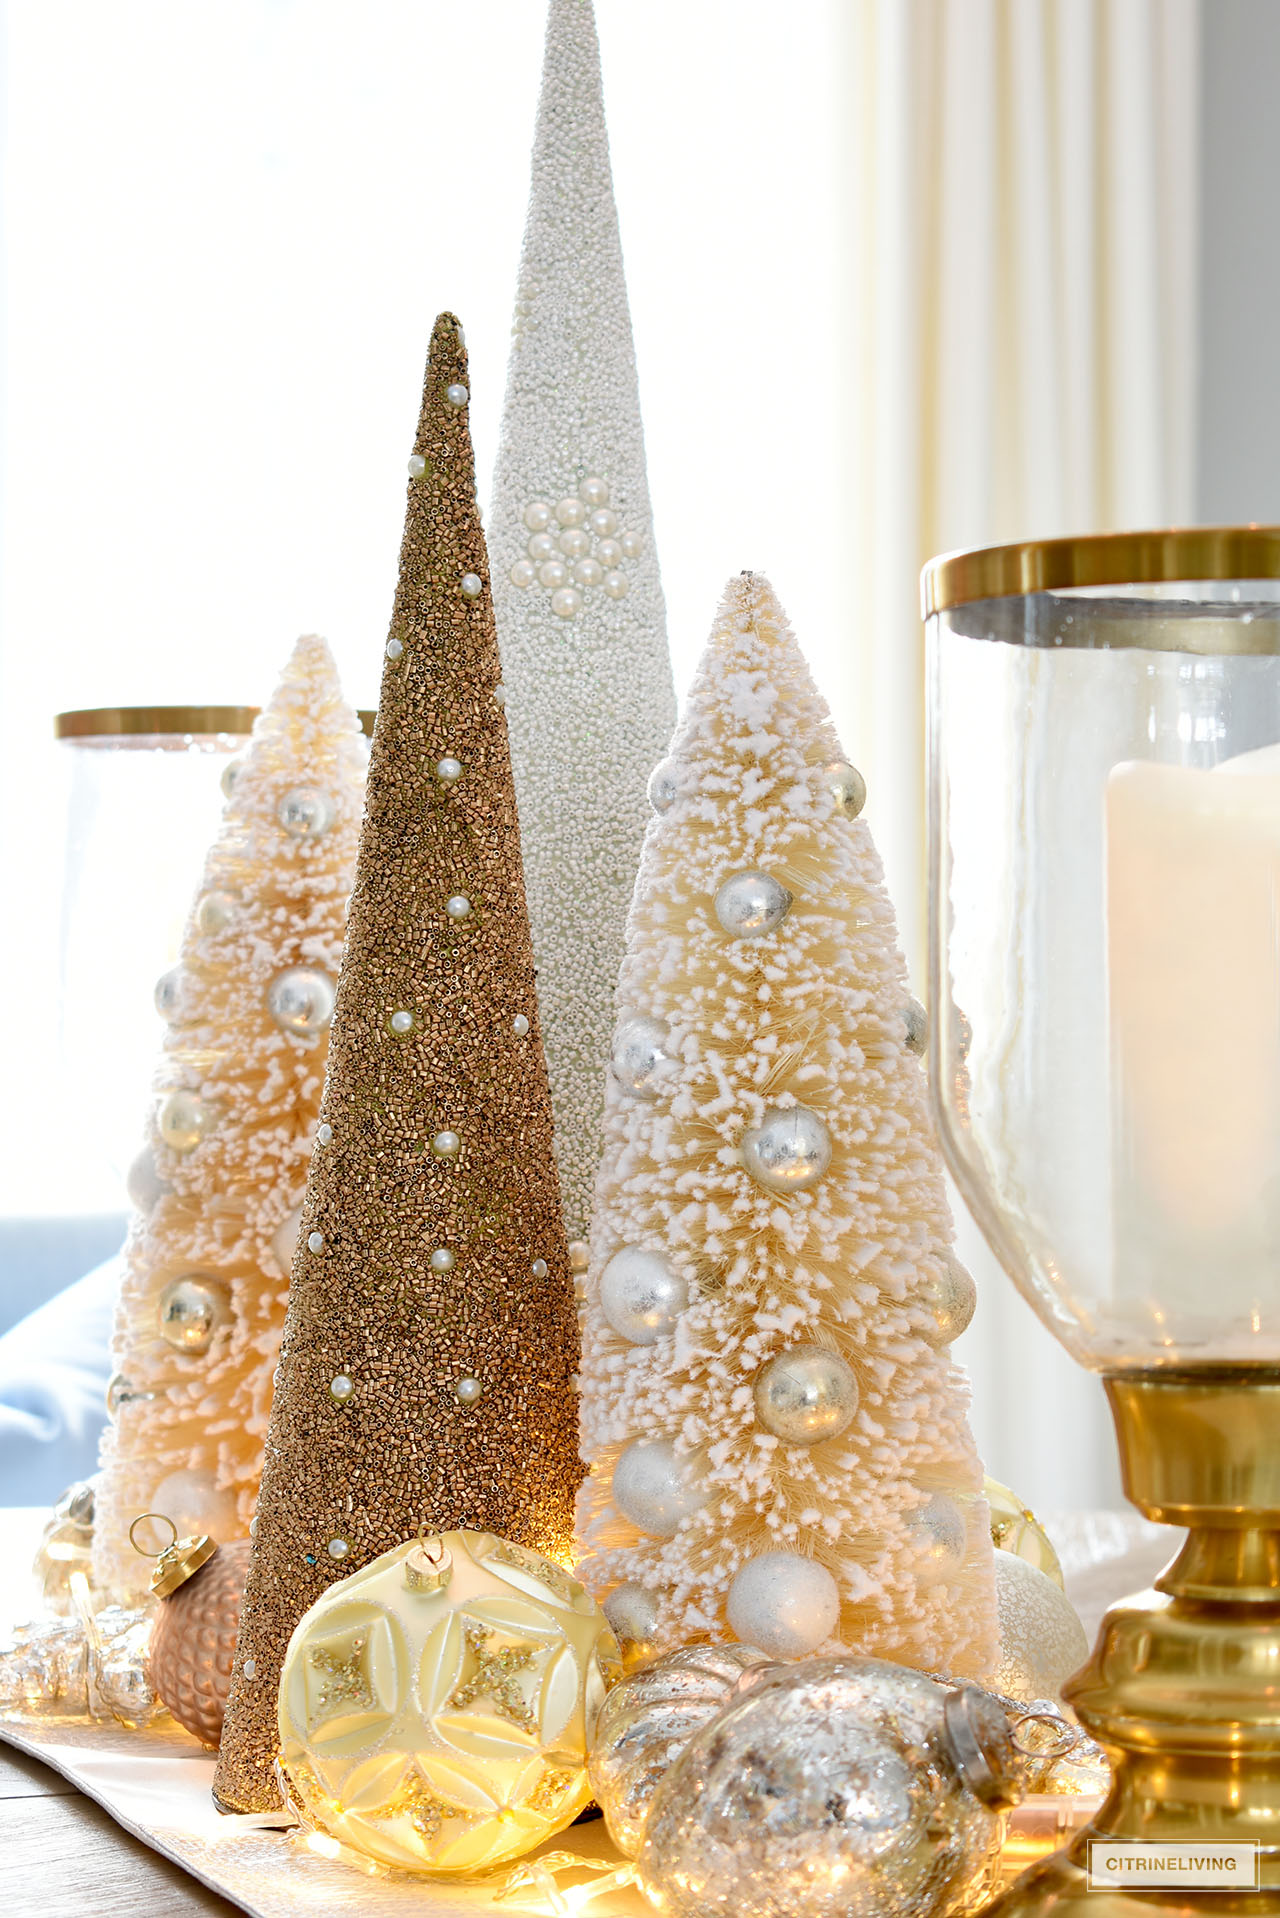 Christmas centerpiece with gold and ivory beaded trees, bottlebrush trees, ornaments and glass hurricanes.